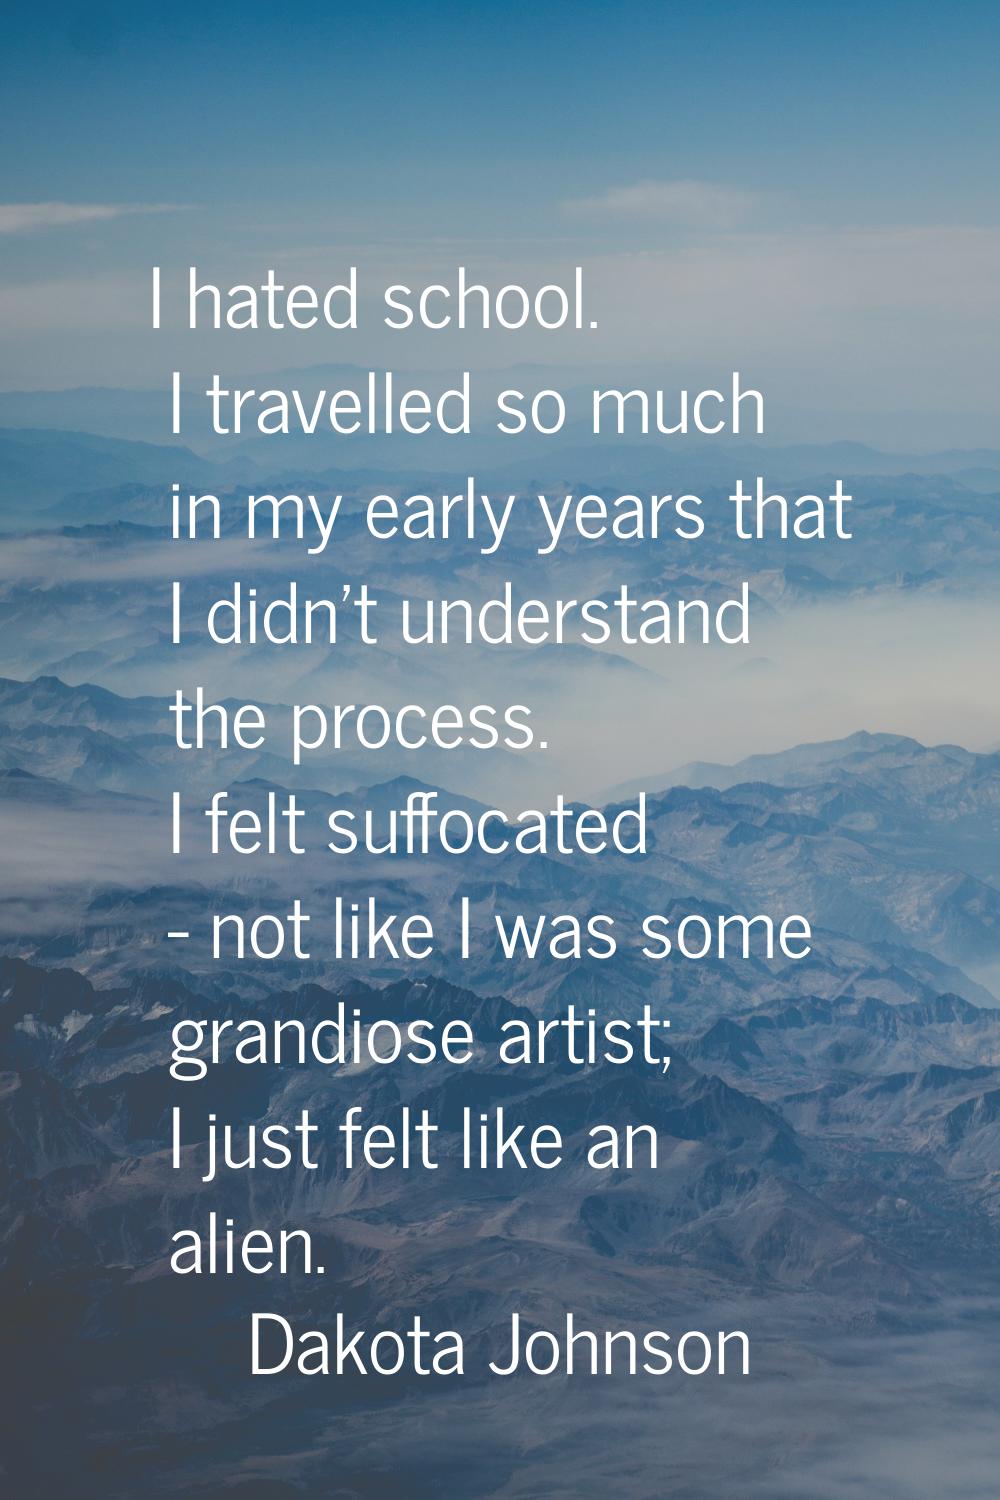 I hated school. I travelled so much in my early years that I didn't understand the process. I felt 